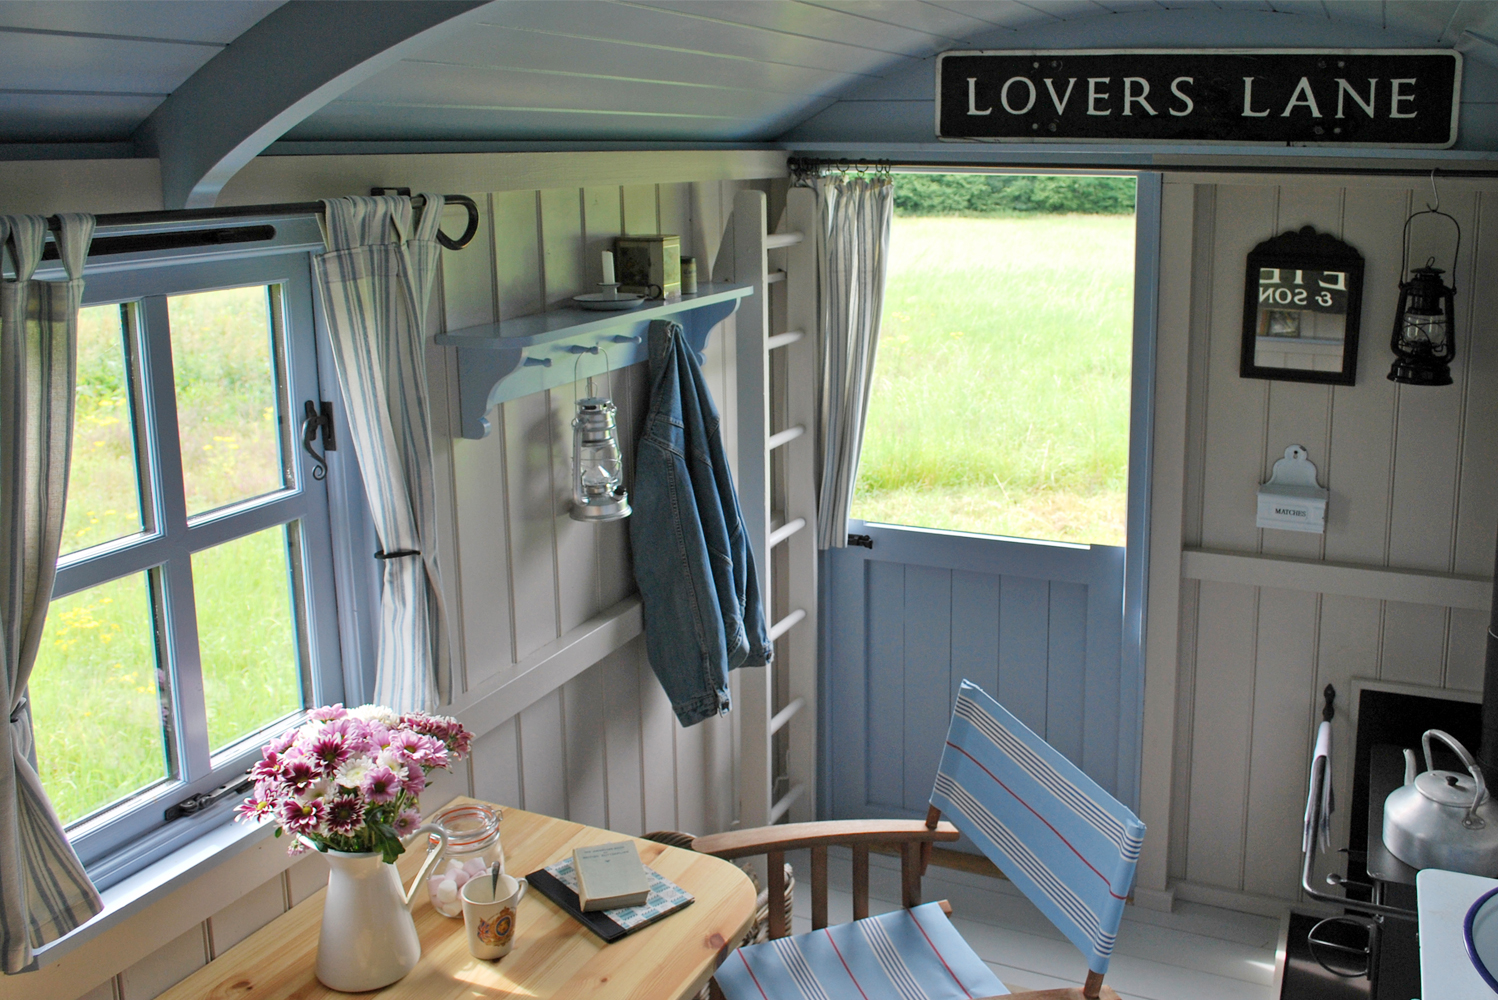 Beautifully decorated Beacon shepherd's hut interior in shades of ivory and pale blue with painted wood-panelled walls, stable door open to the meadow, jar of marshmallows and books on the table with director's chair, and woodburning stove with kettle on the top.<br />
For guest information, click the links on this page